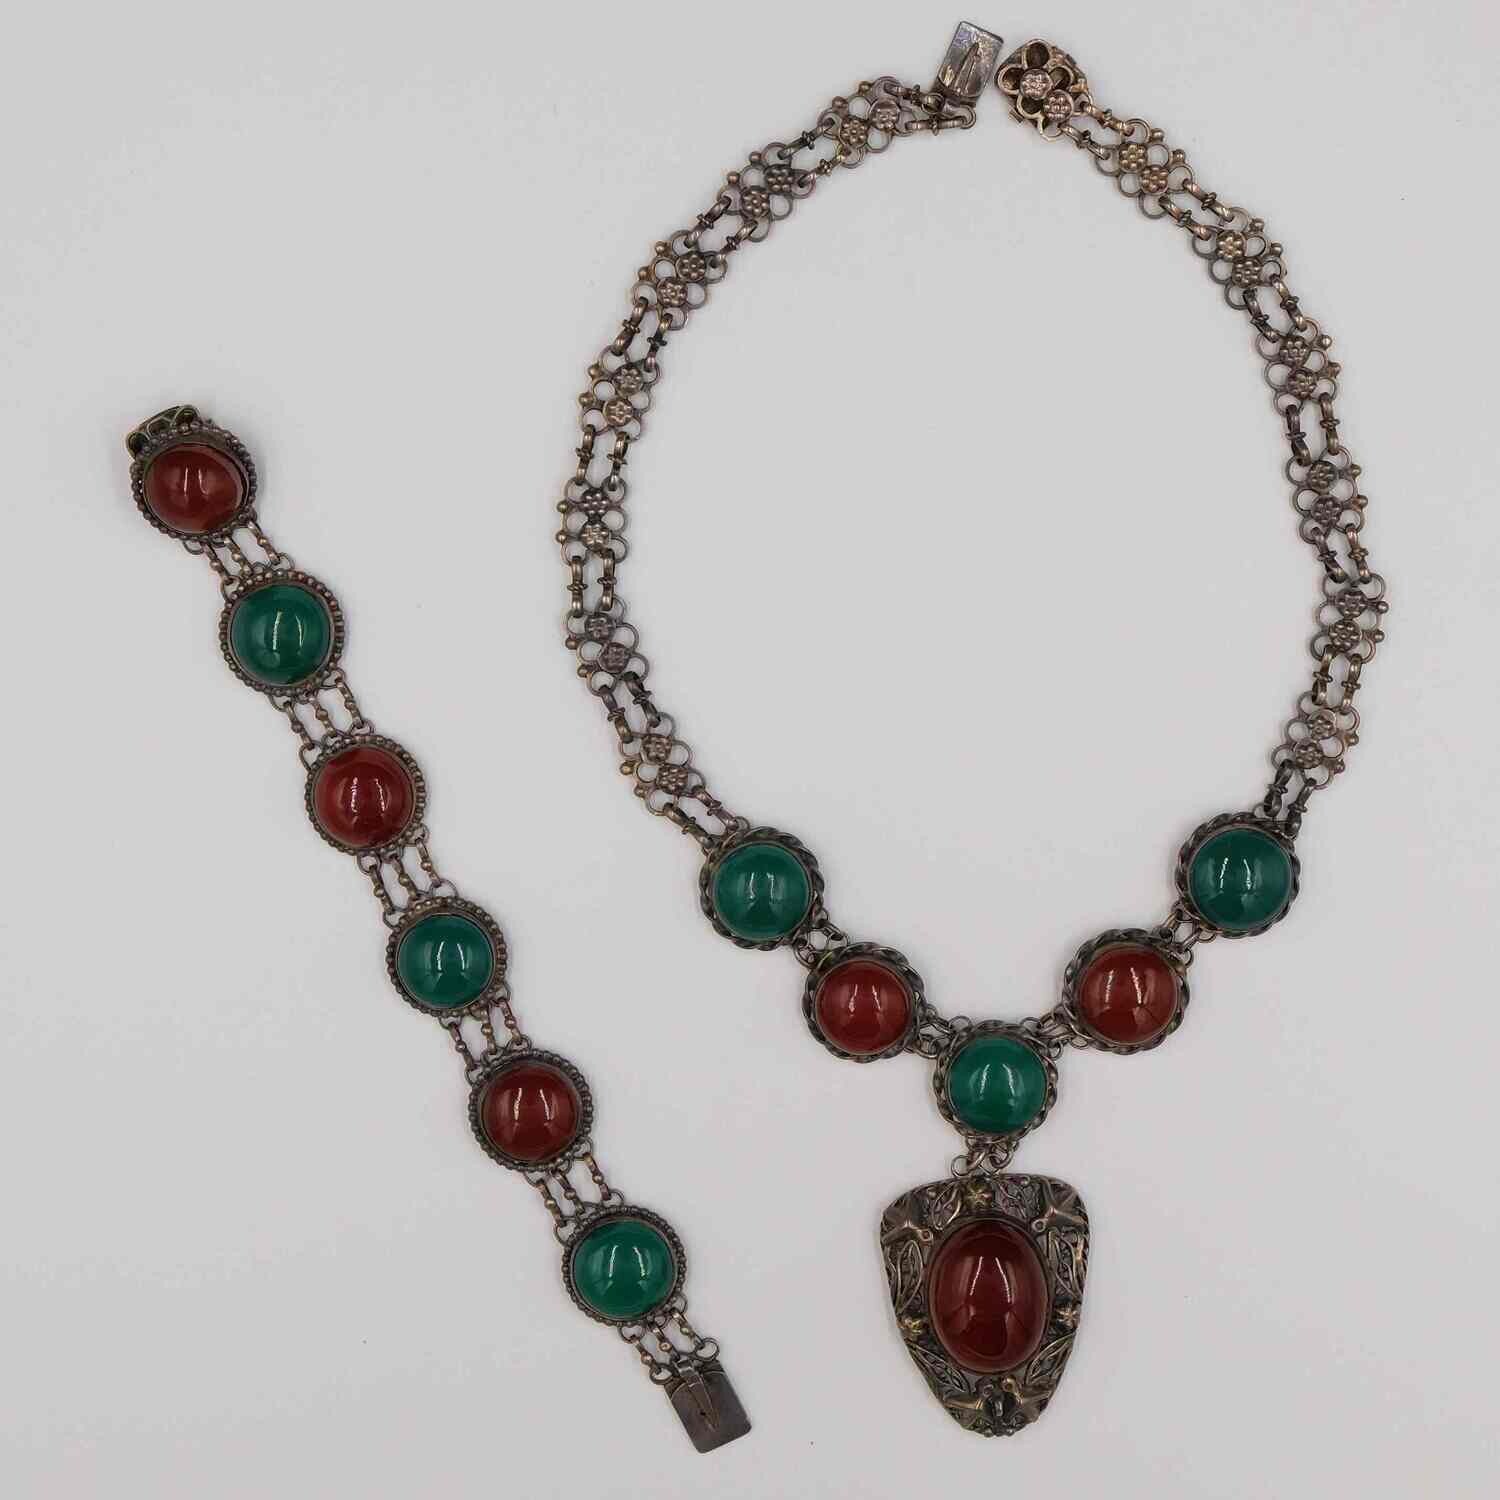 Antique Sterling Silver Carnelian and Jade Bracelet and Necklace c.1900